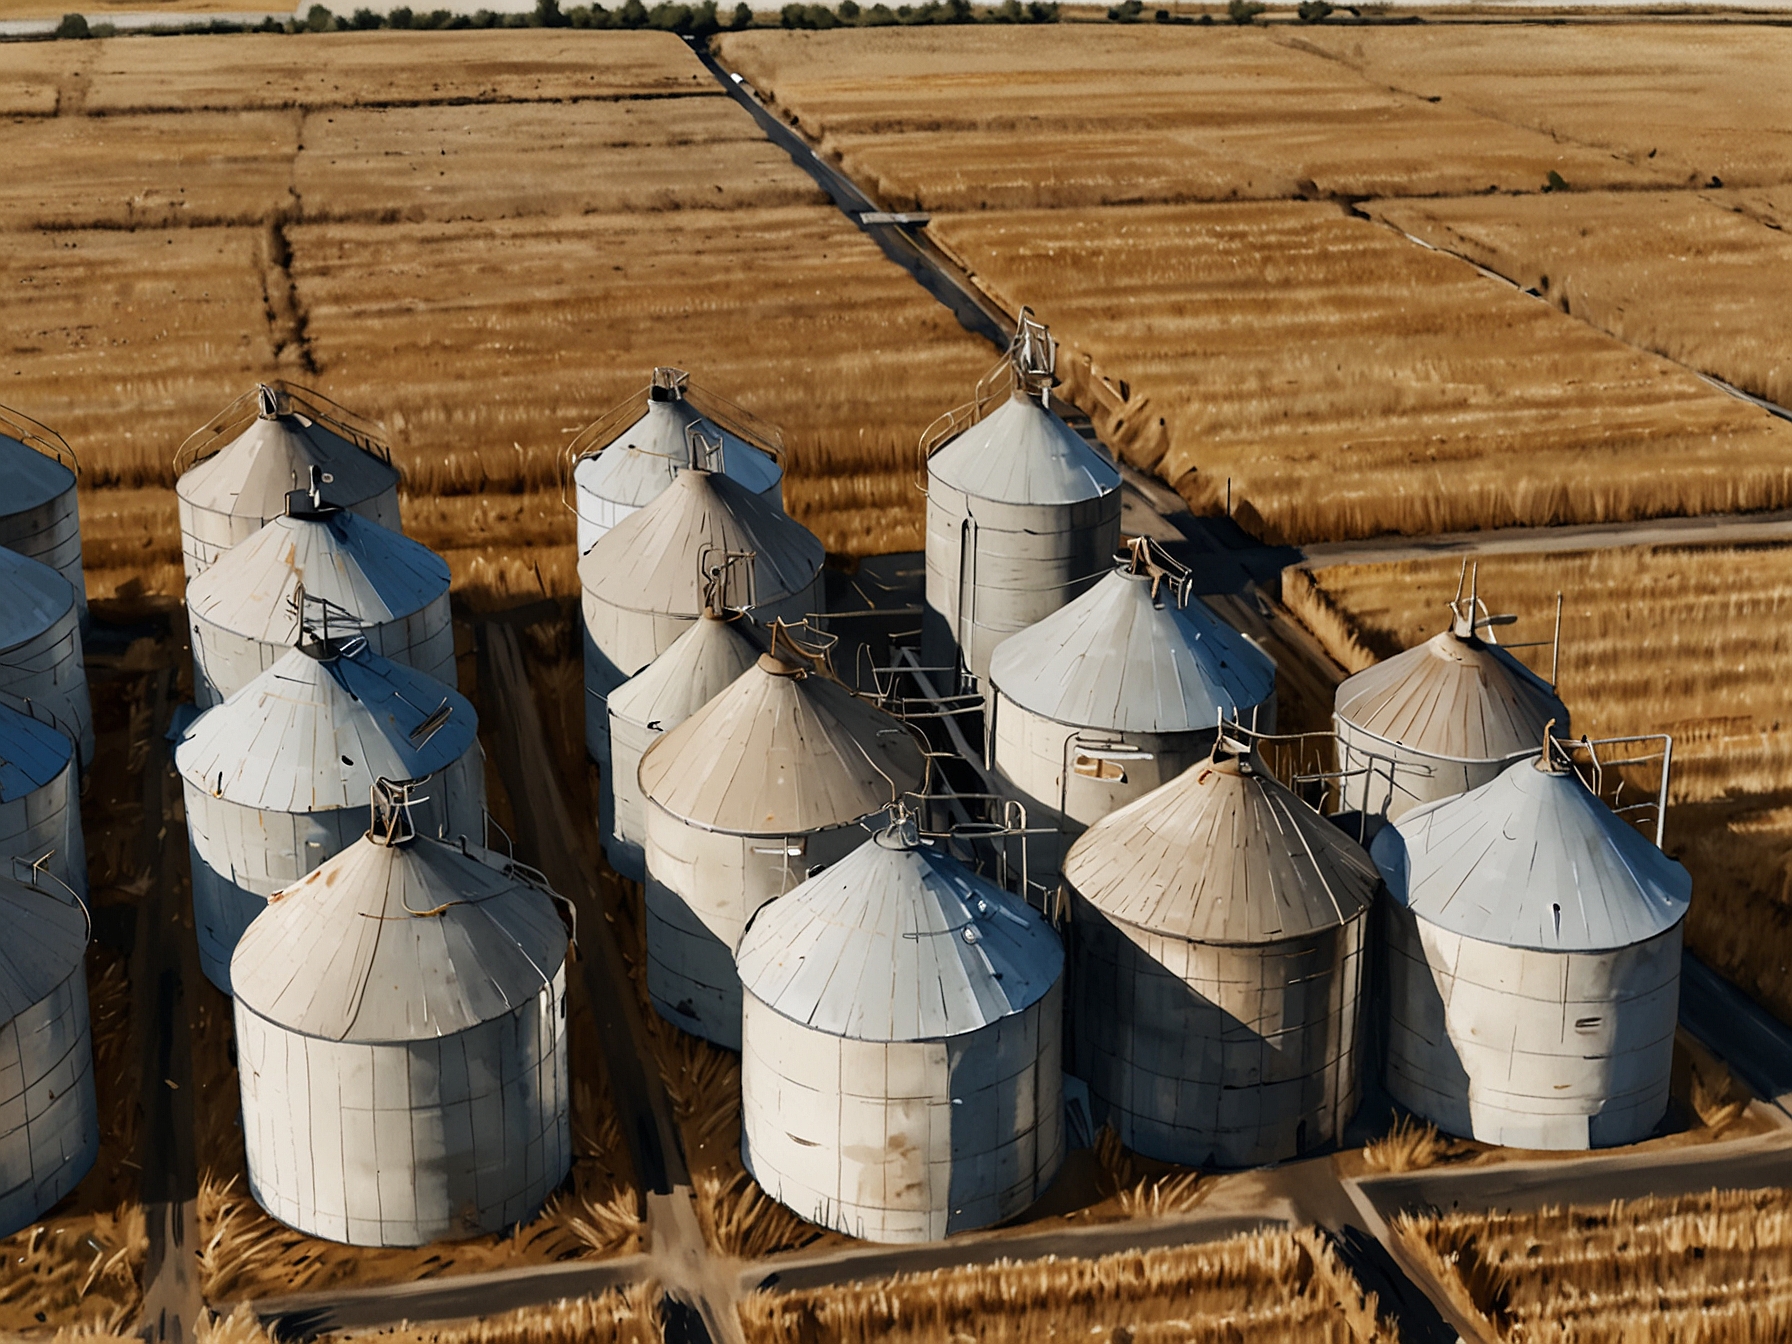 Aerial view of overflowing grain silos in Argentina's pampas, symbolizing the country's record harvest and capturing farmers' hope for better economic policies under Milei's leadership.